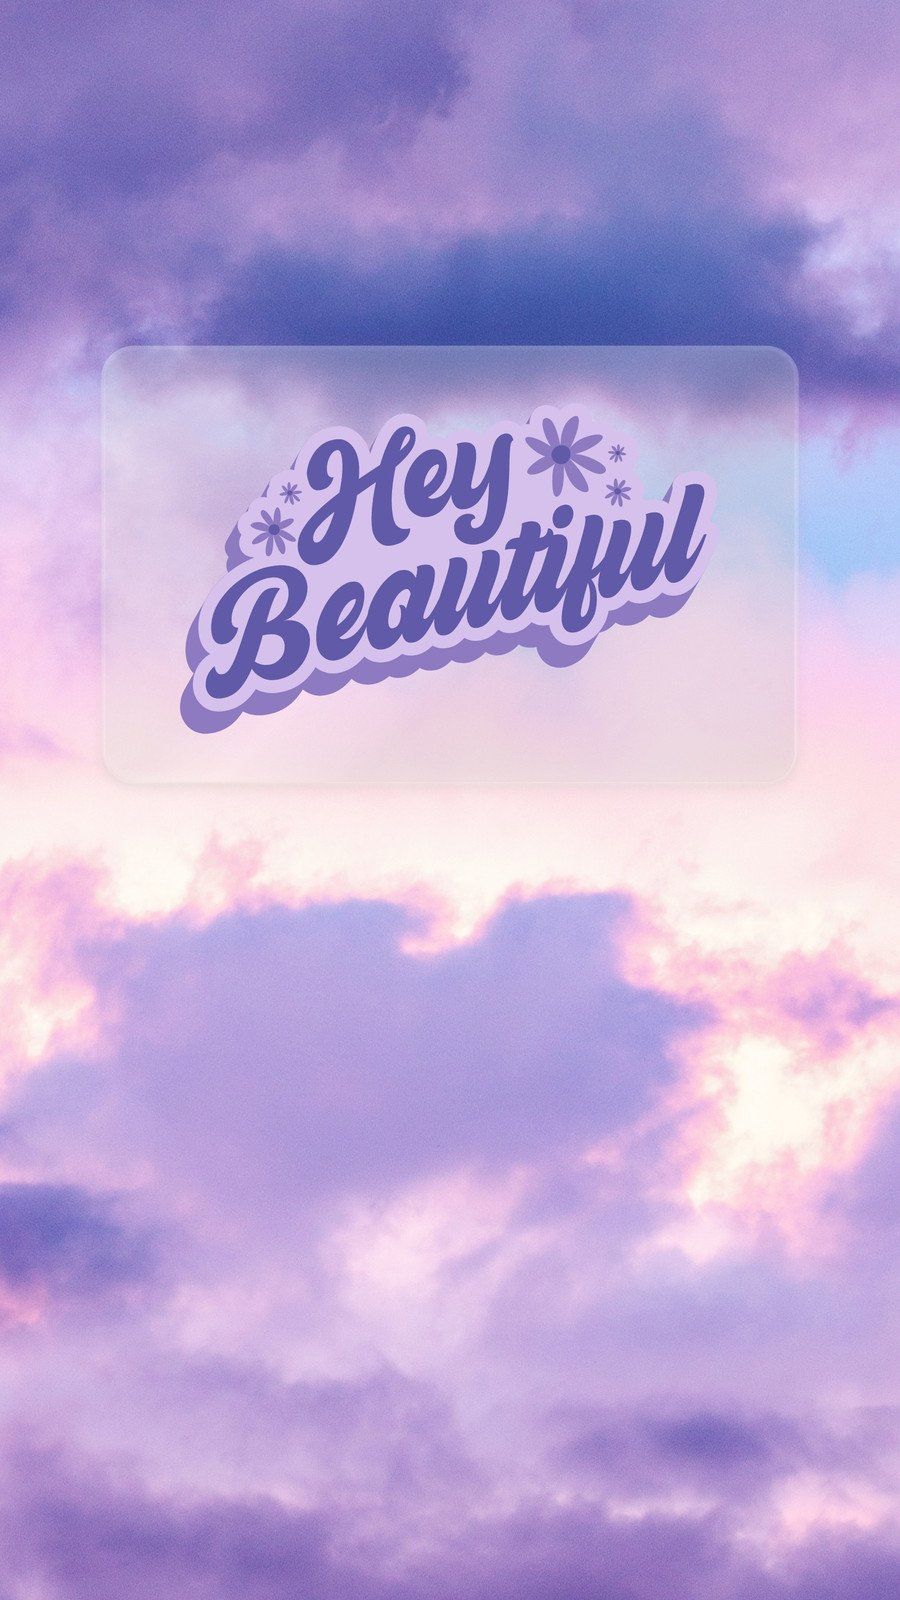 Aesthetic phone background of a cloudy sky with the words 